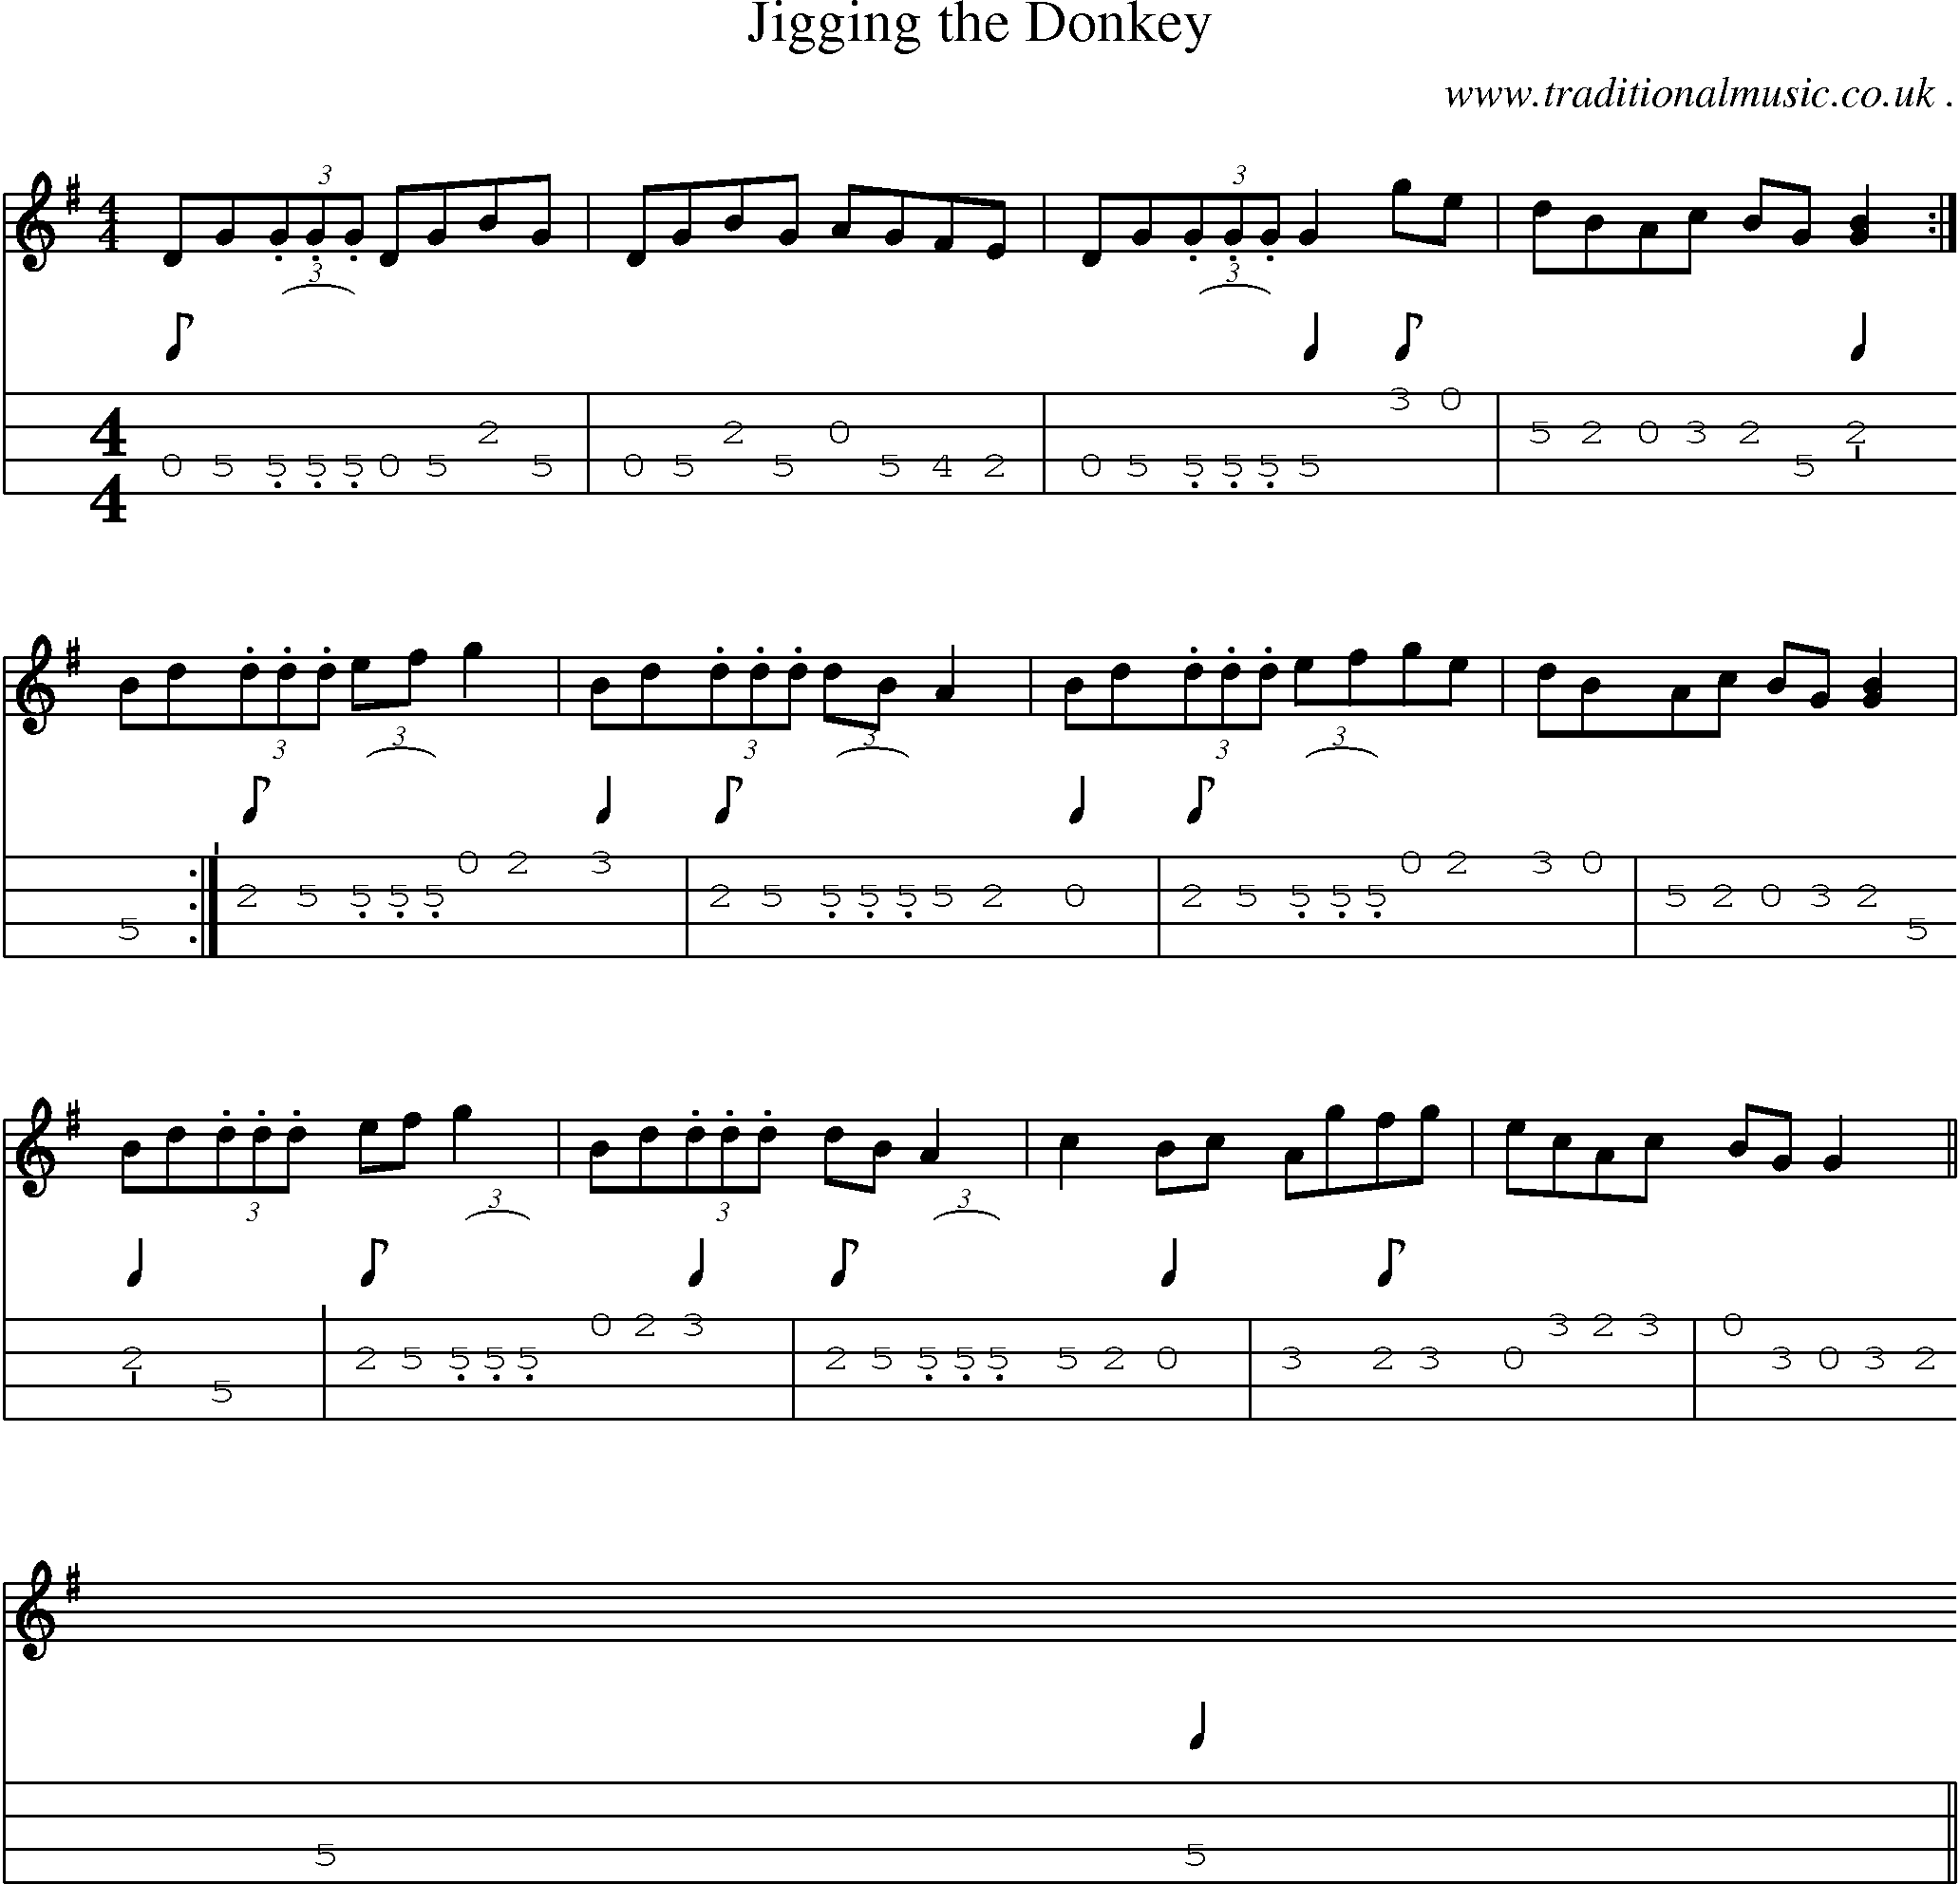 Sheet-Music and Mandolin Tabs for Jigging The Donkey